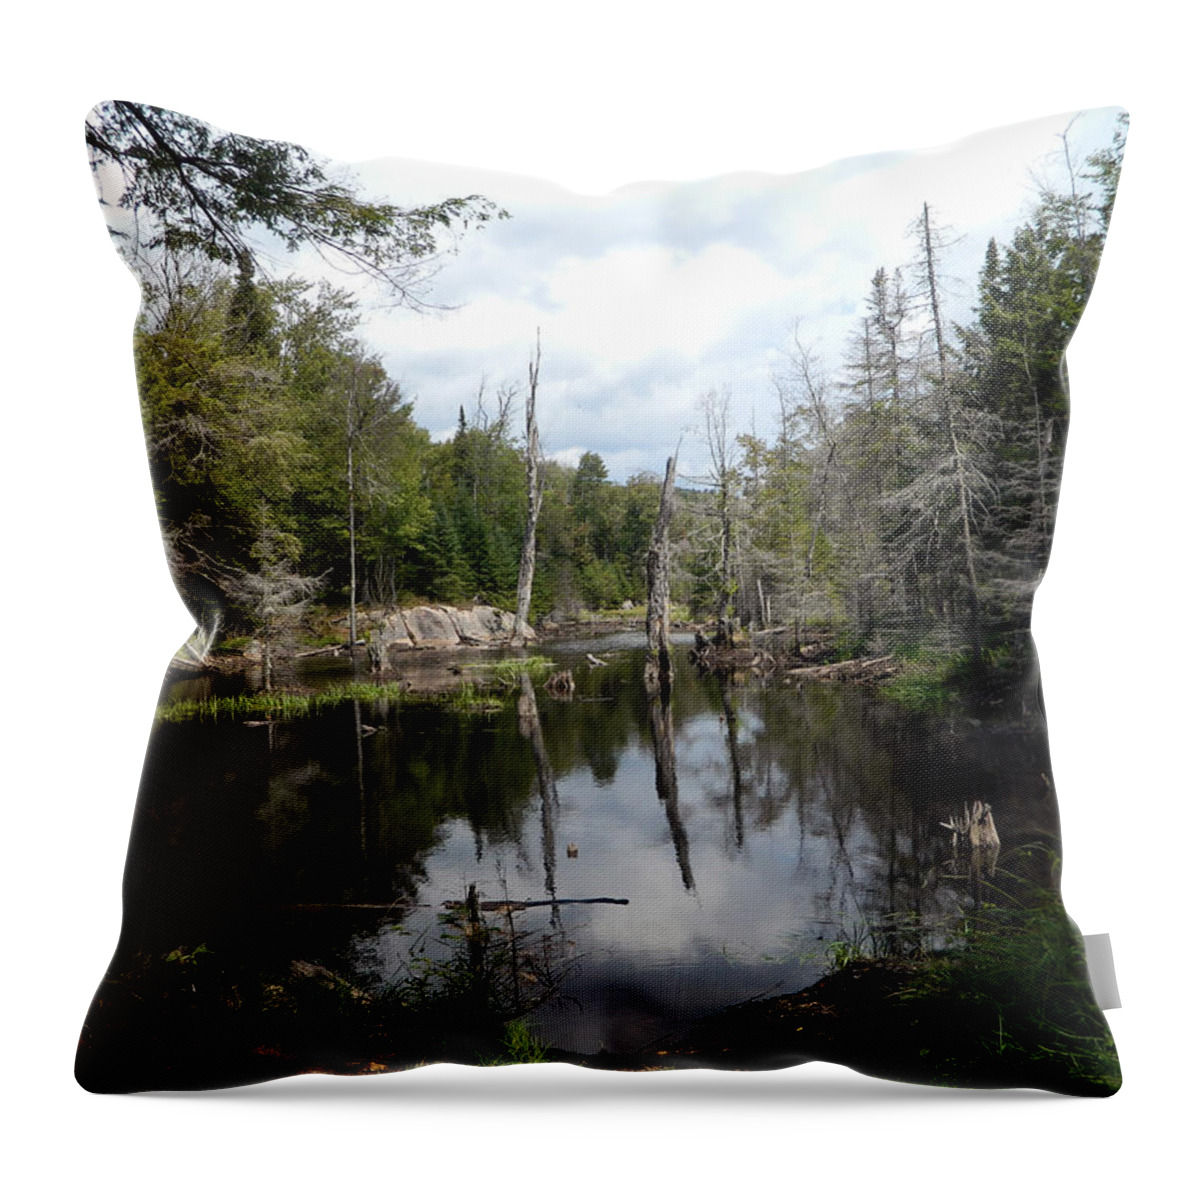  Throw Pillow featuring the photograph Swamp by Adrian Maggio